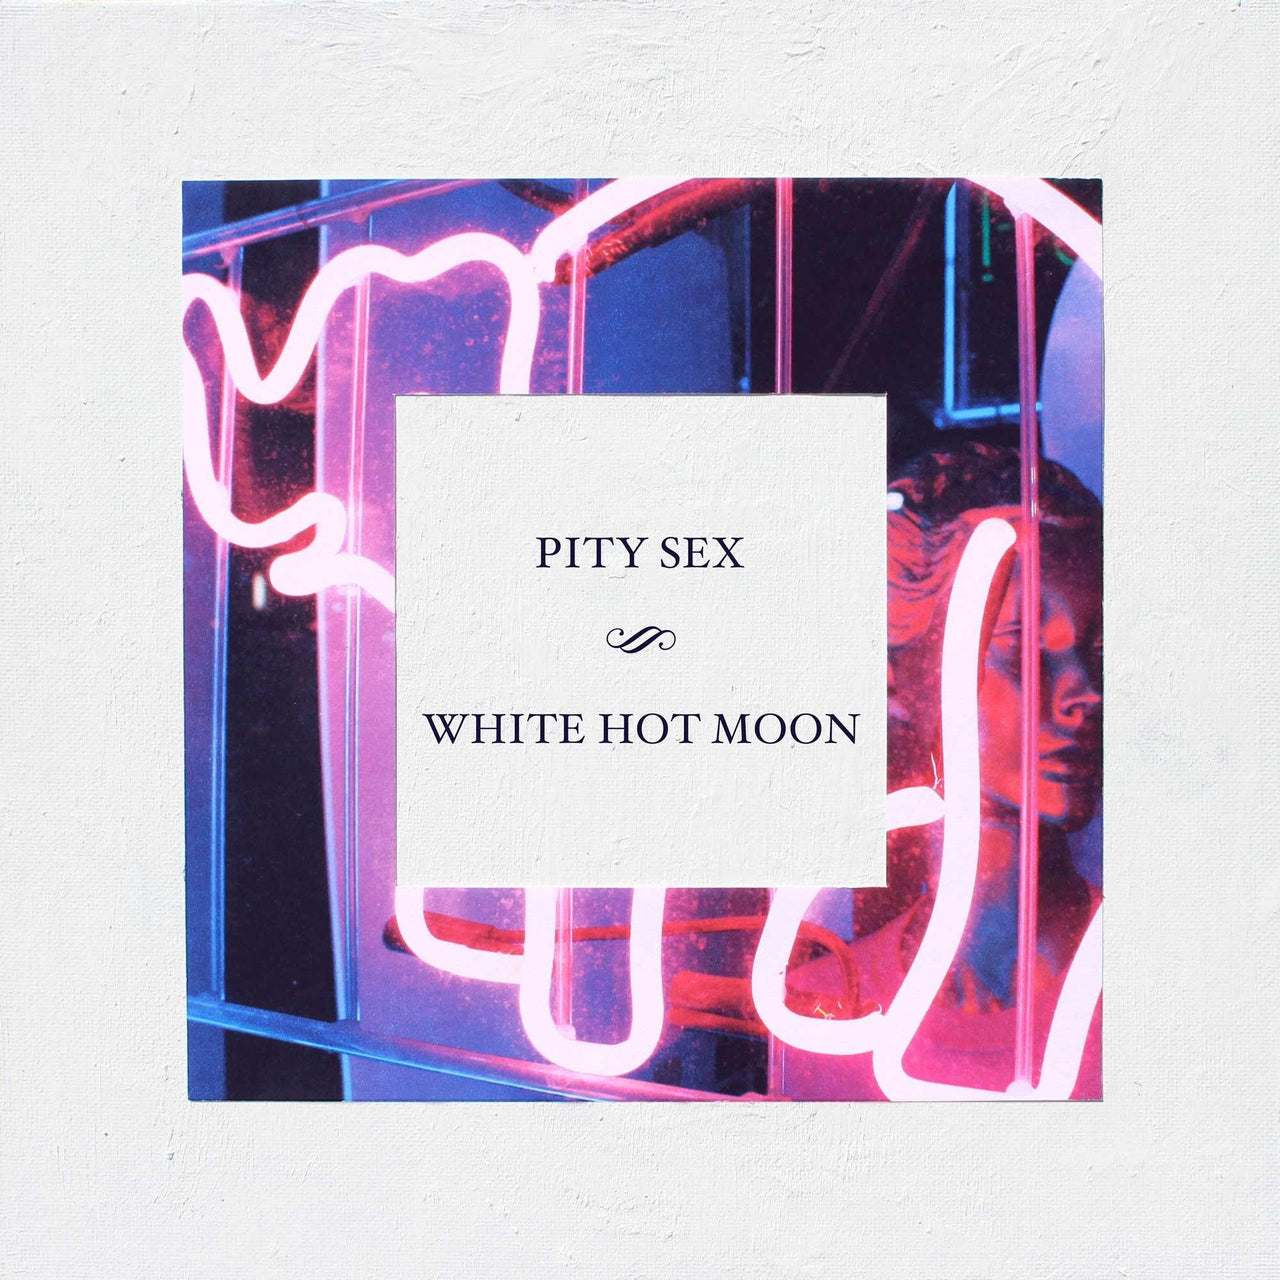 Buy – Pity Sex "White Hot Moon" 12" – Band & Music Merch – Cold Cuts Merch